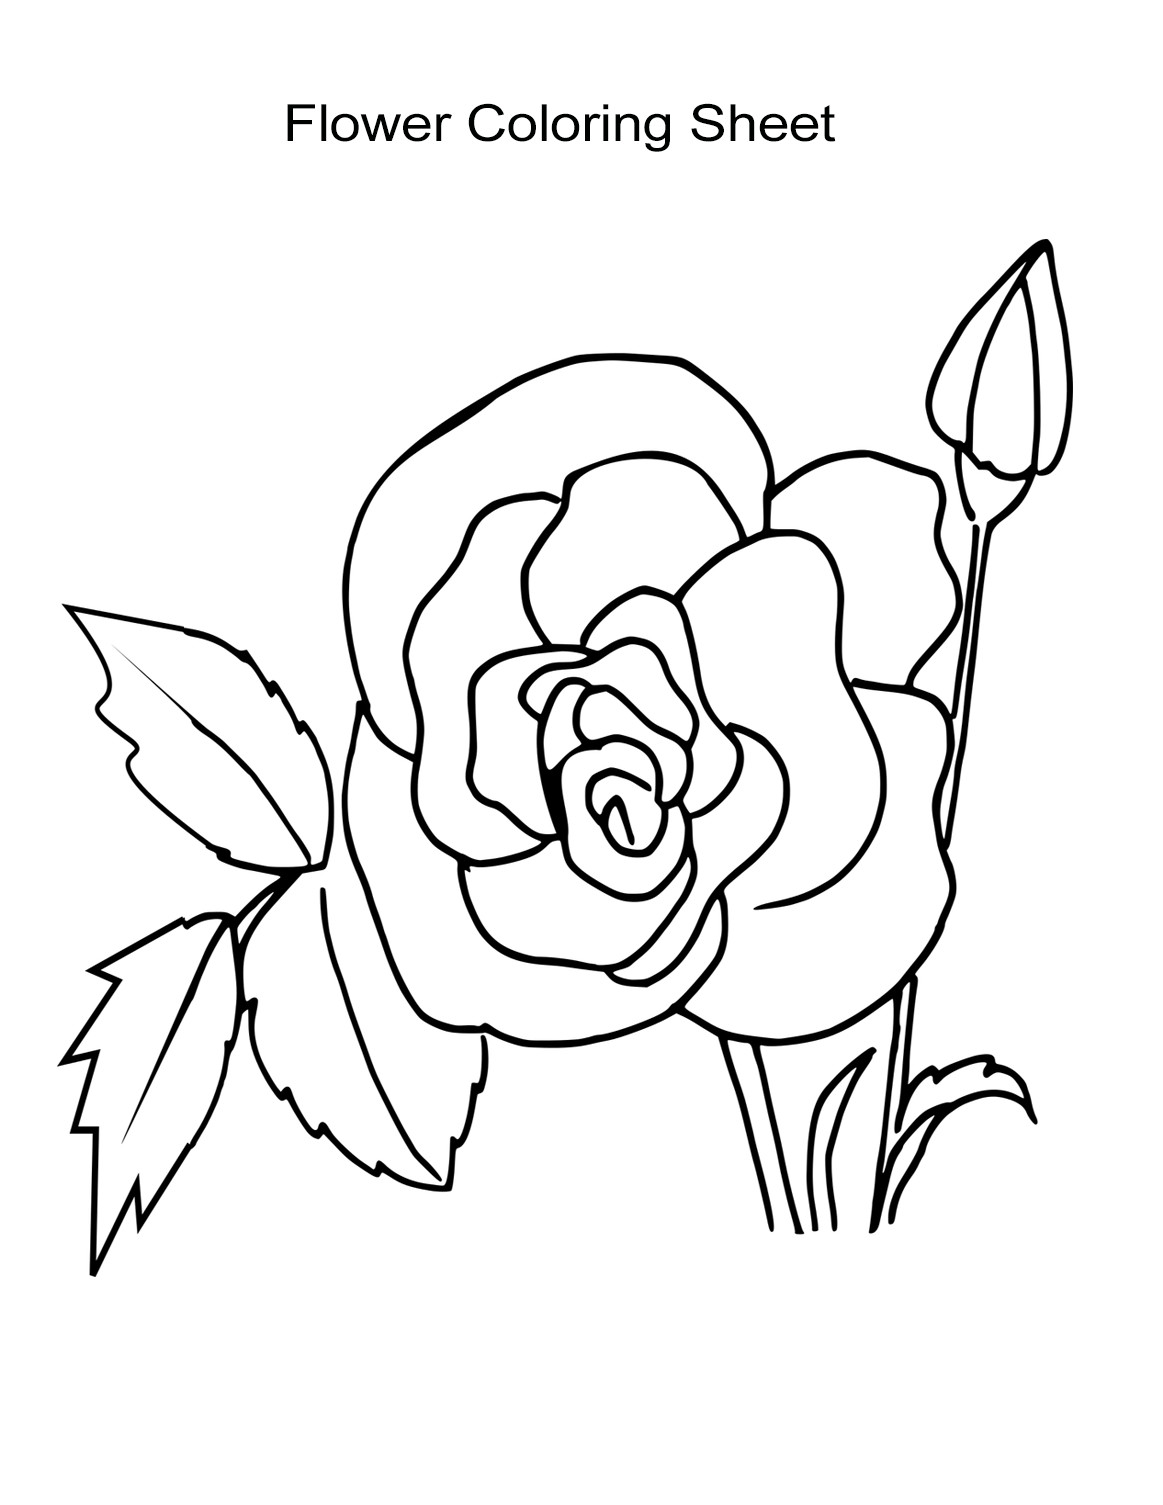 Coloring Pages Of Roses For Boys
 10 Flower Coloring Sheets for Girls and Boys Free